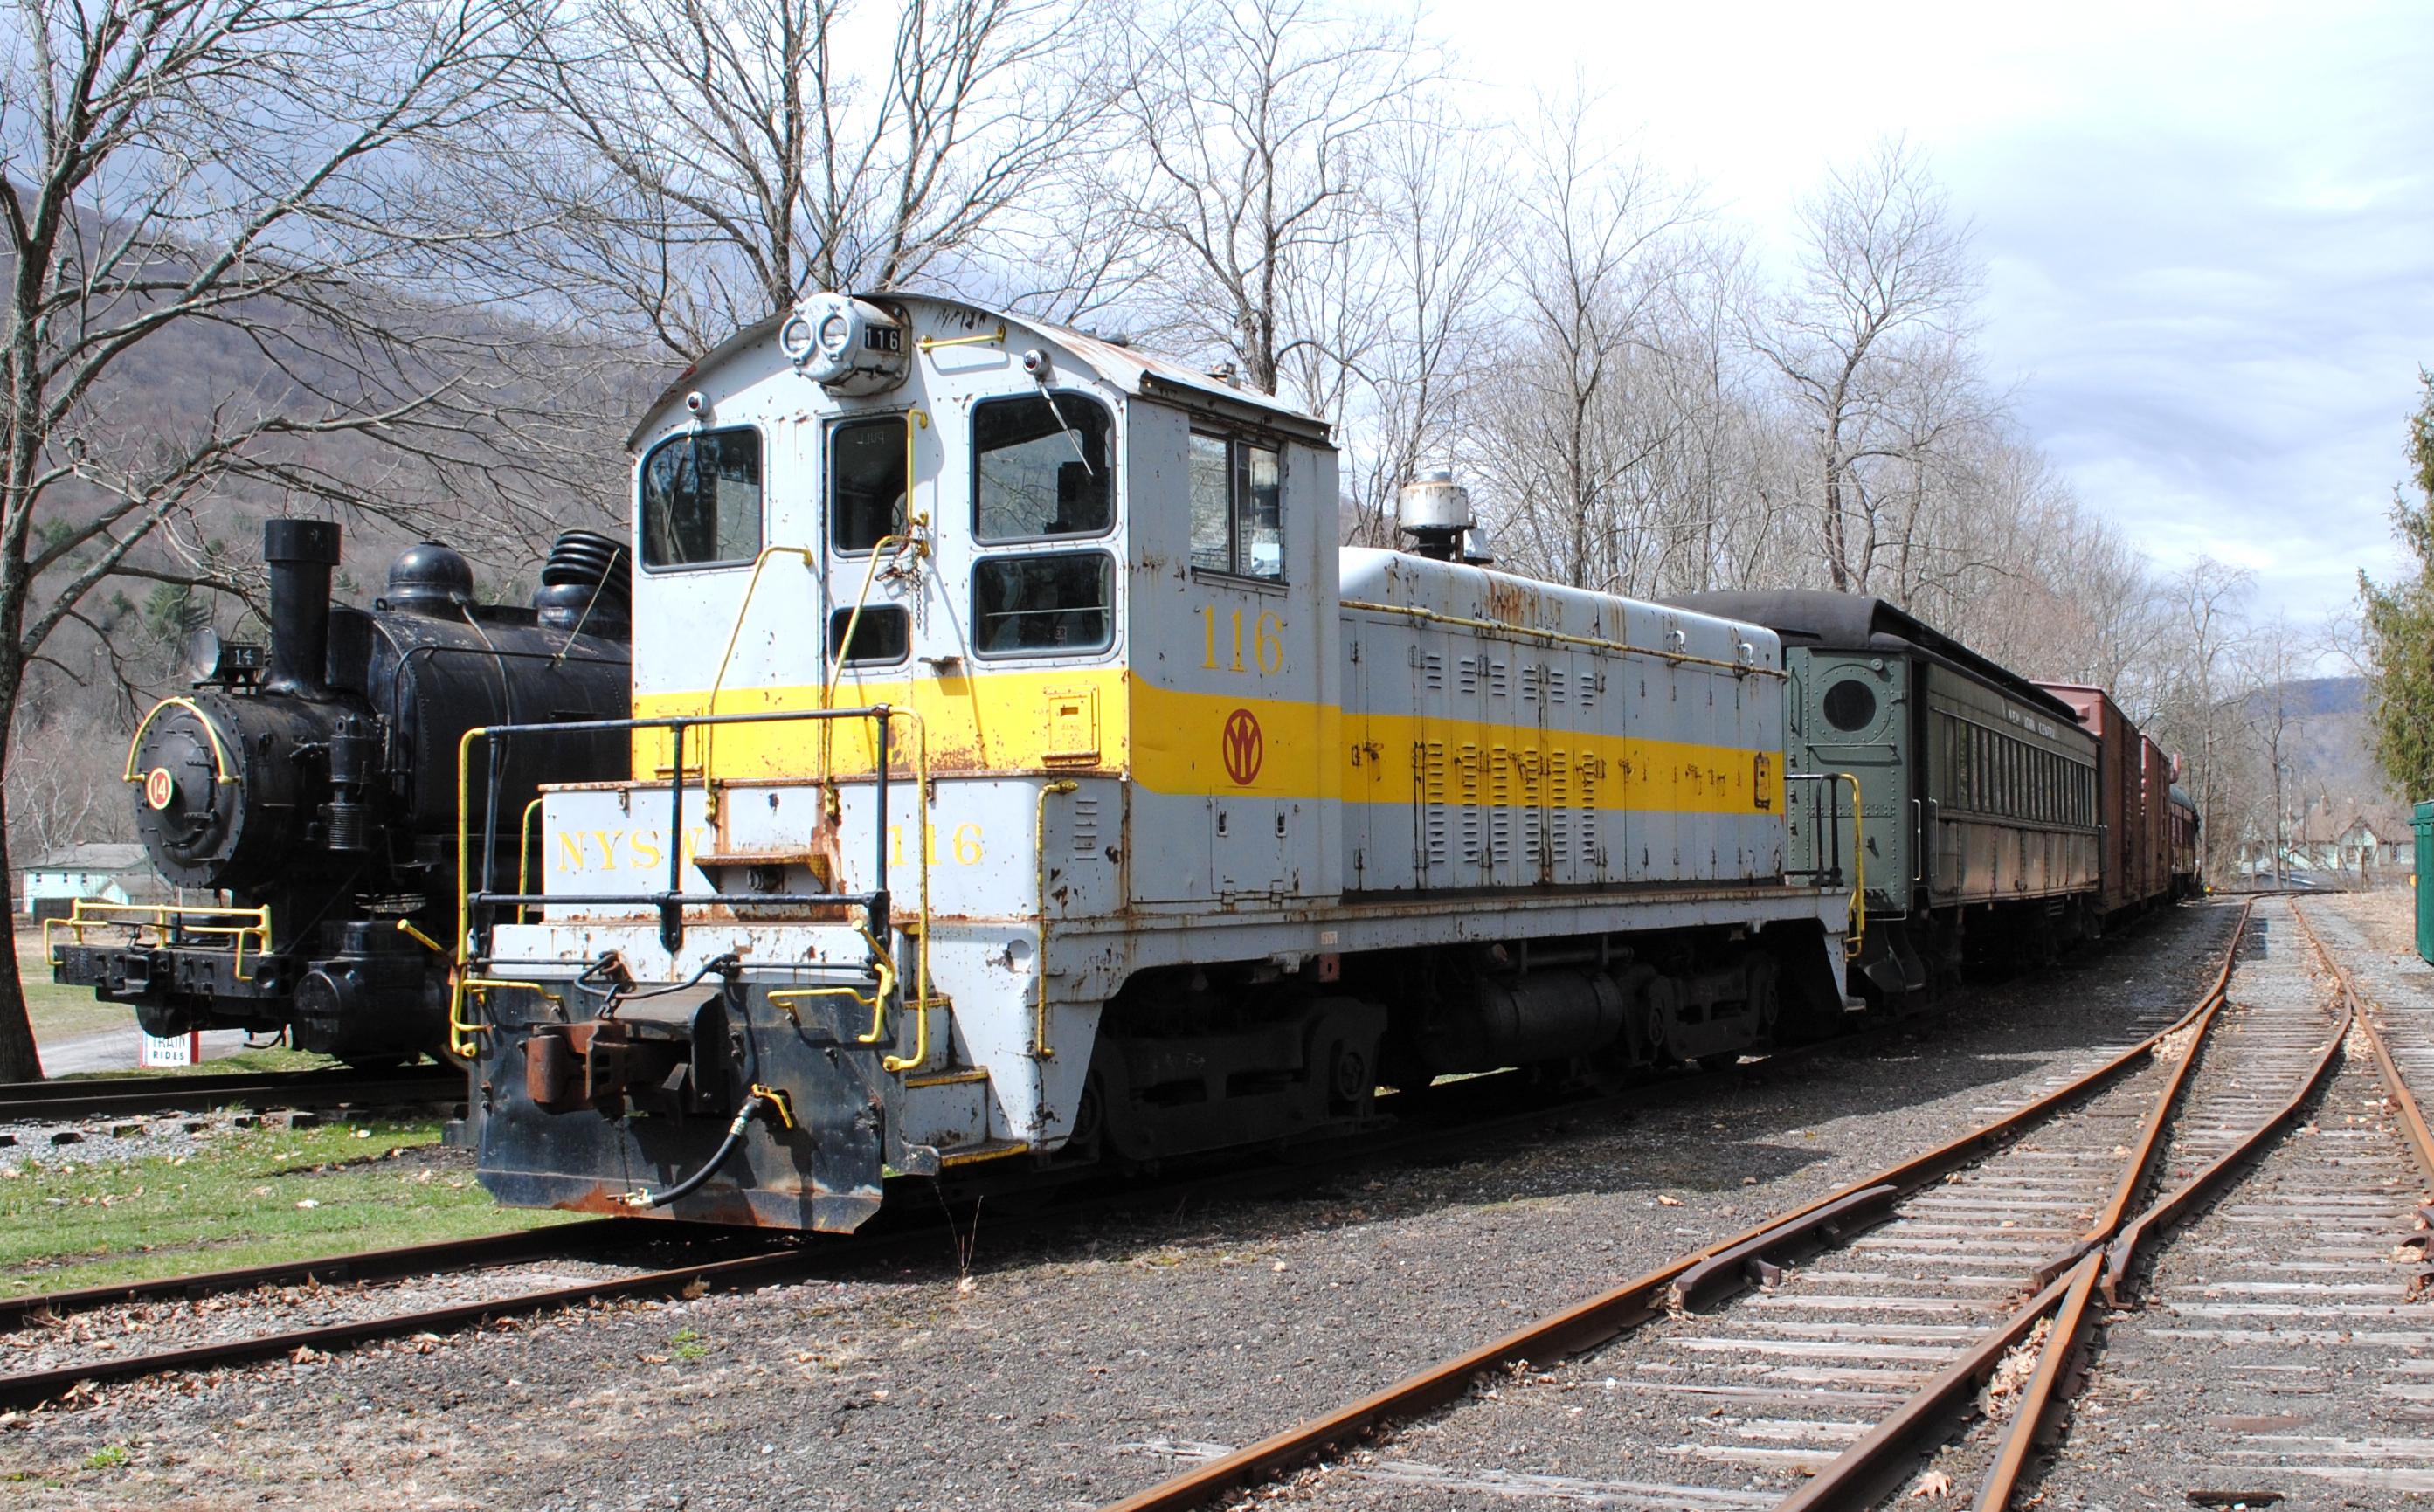 Yard switcher and an old steamer